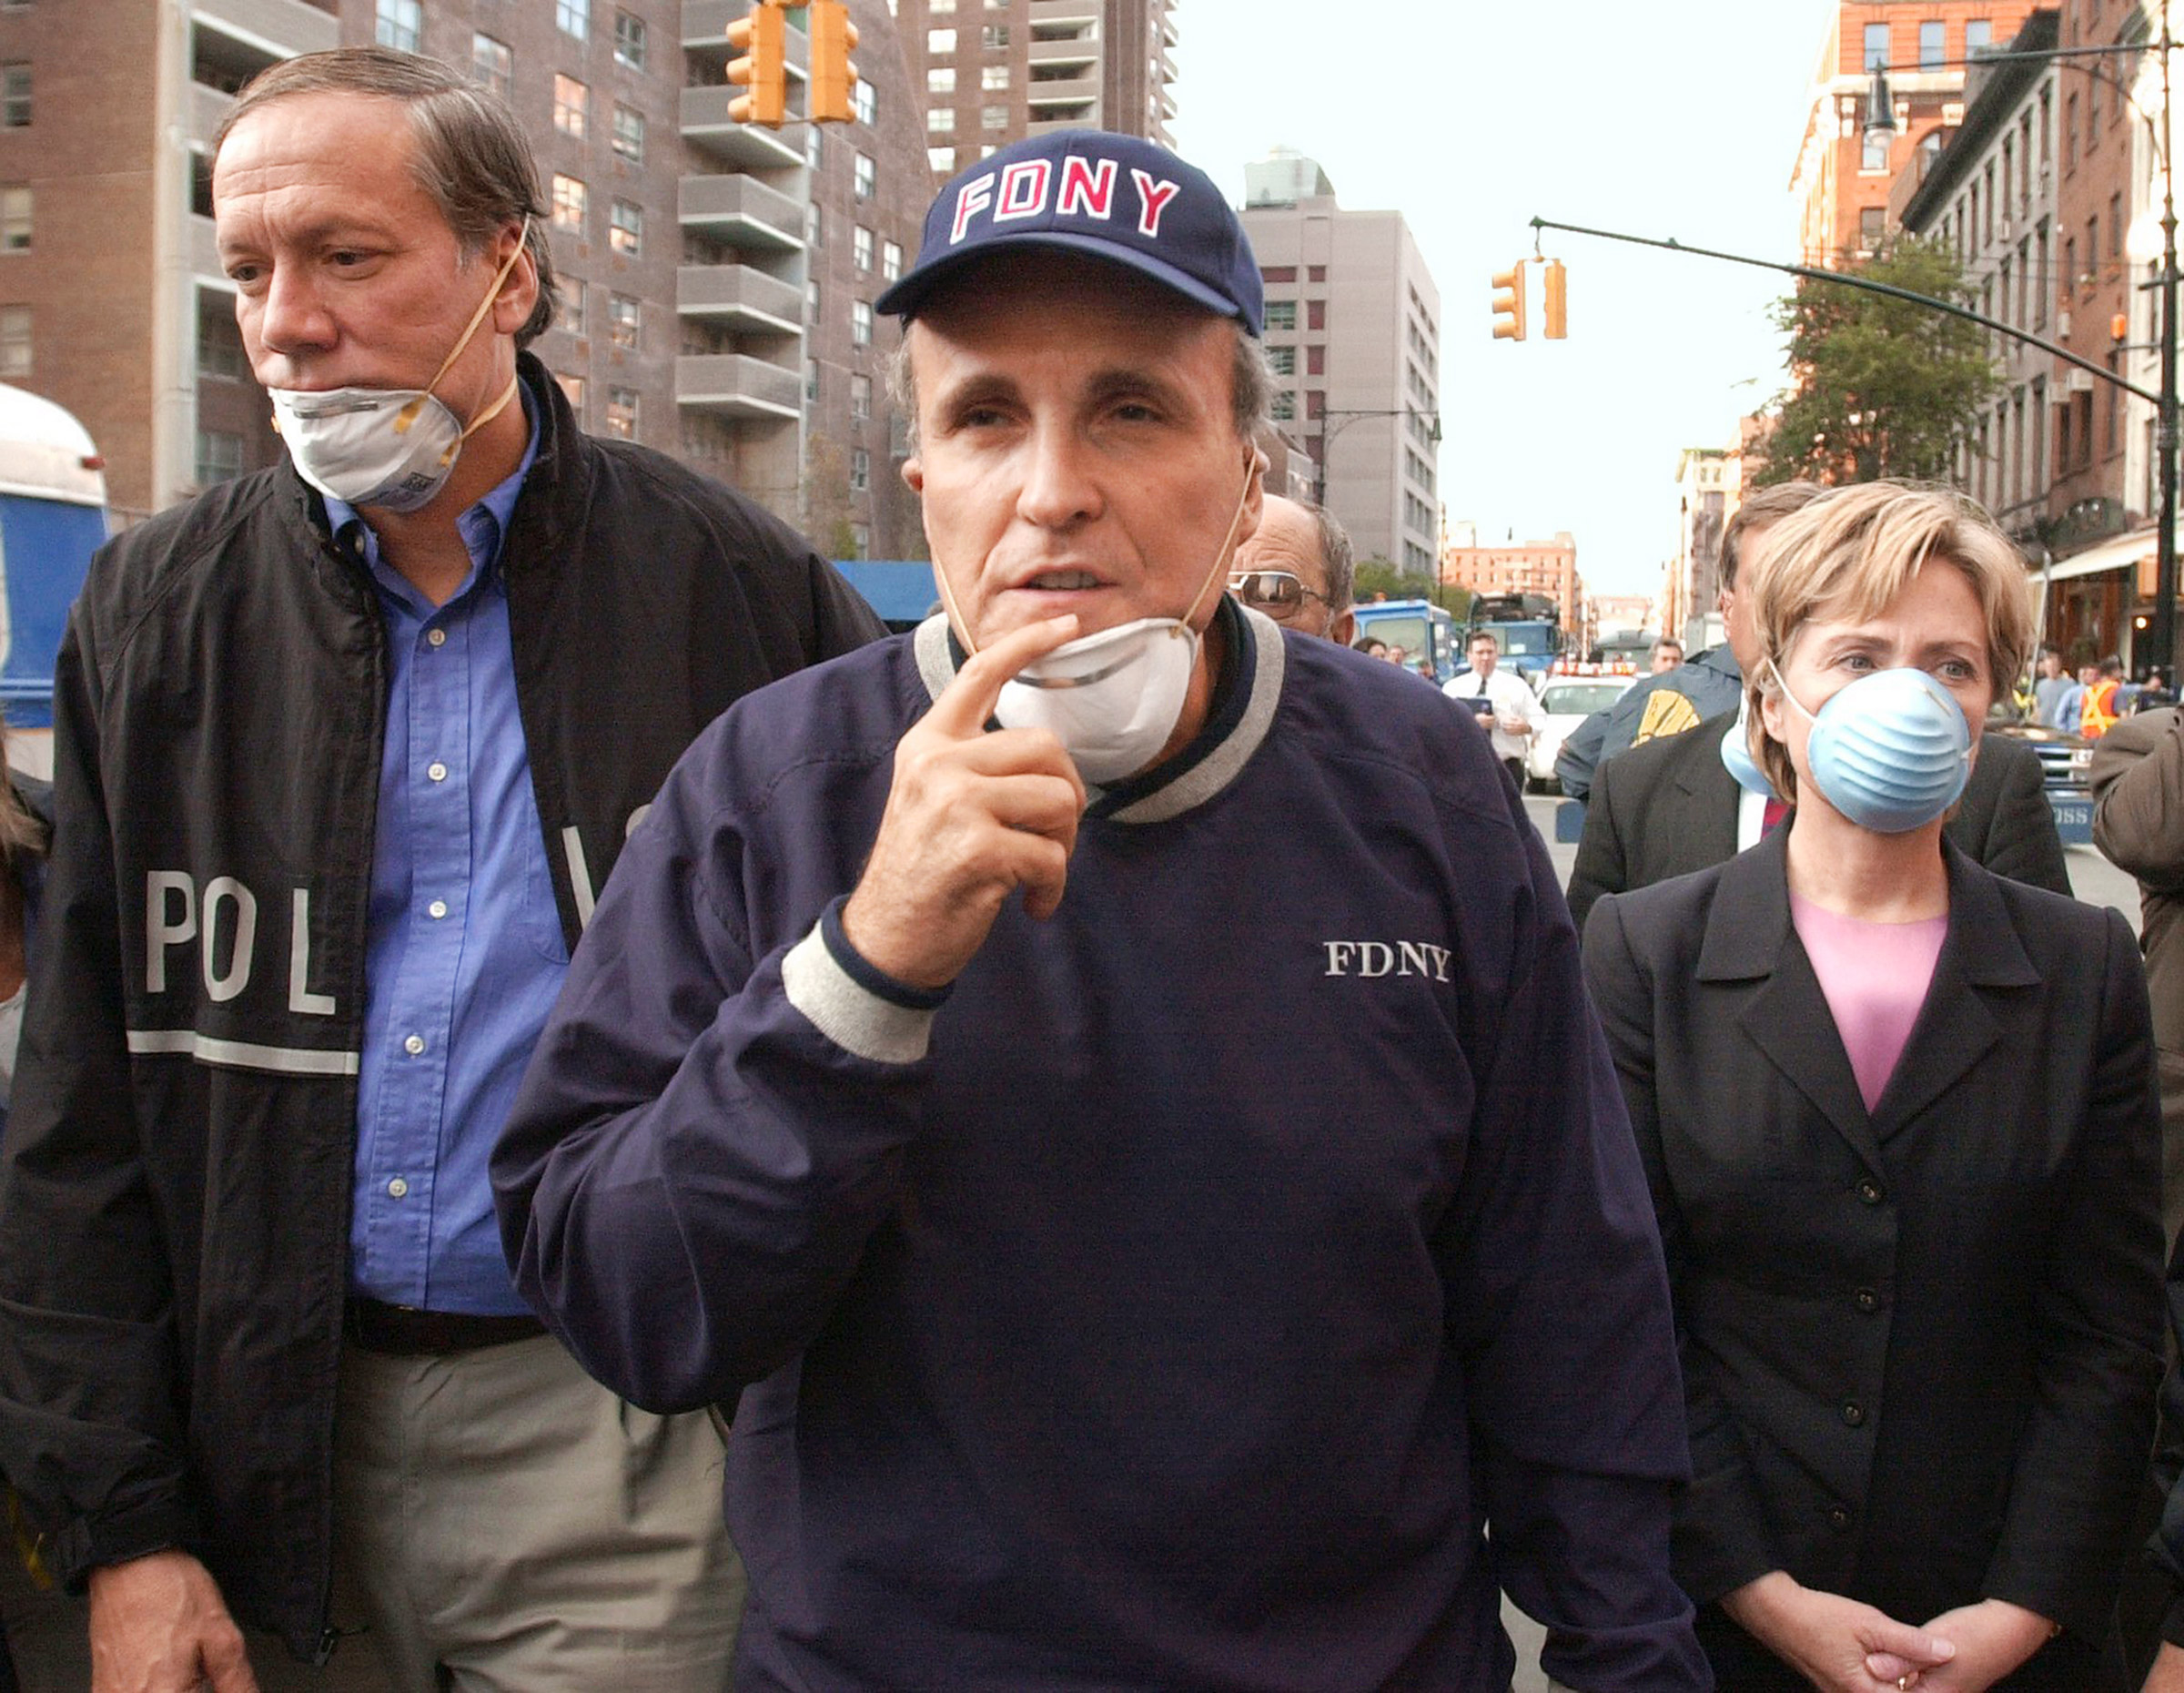 Giuliani became a figure of resilience after the Sept. 11 attacks (Robert F. Bukaty—AP)